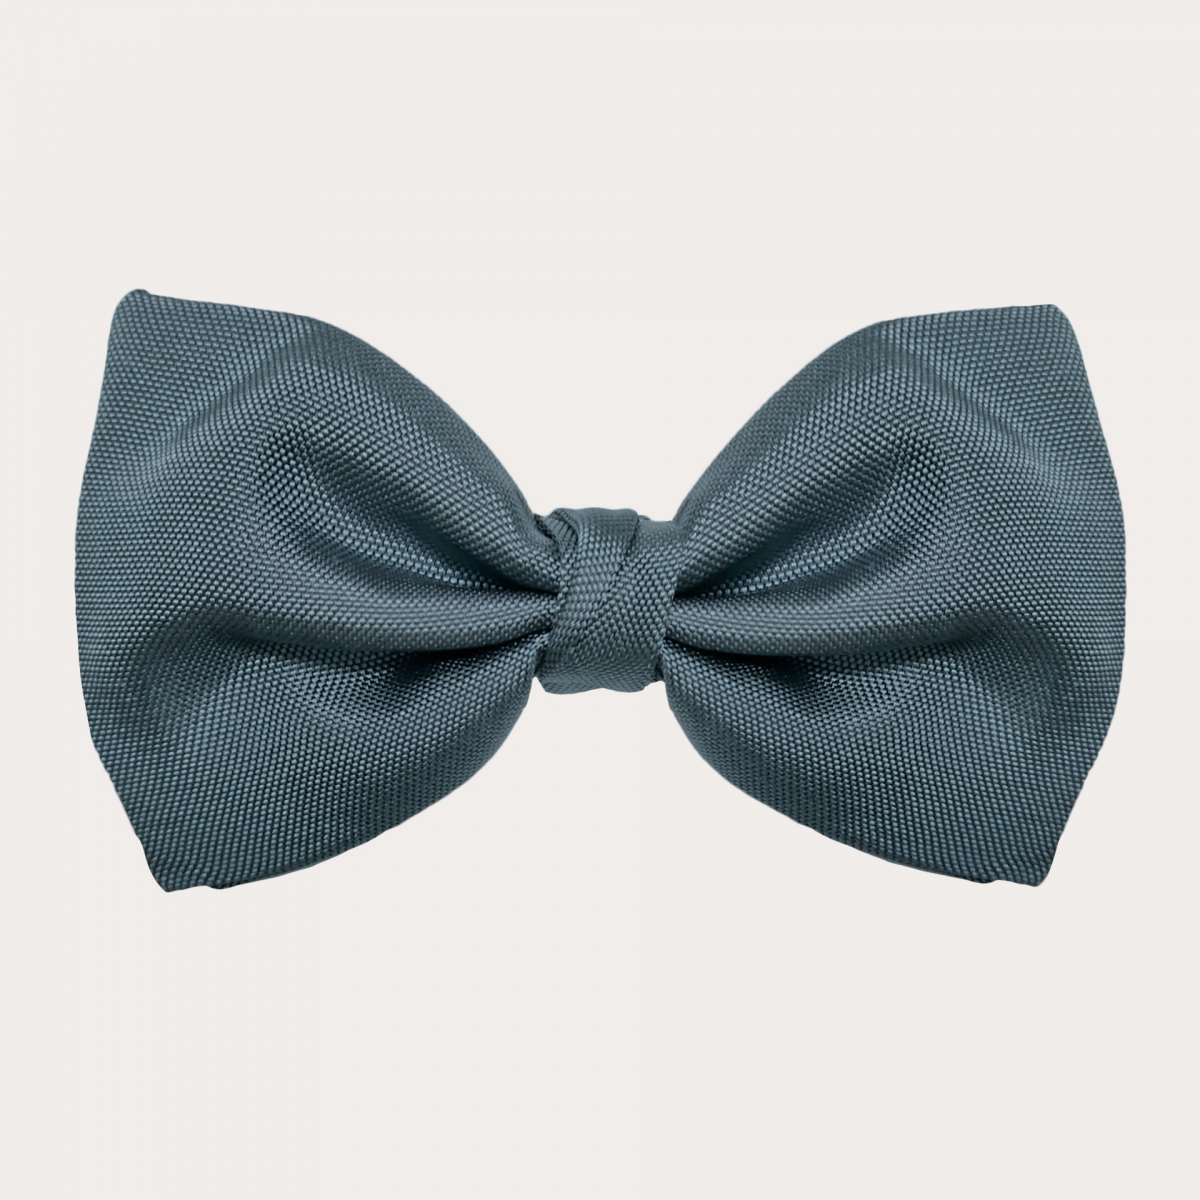 BRUCLE Elegant set of elastic suspenders, bow tie and pocket square in dusty blue jacquard silk